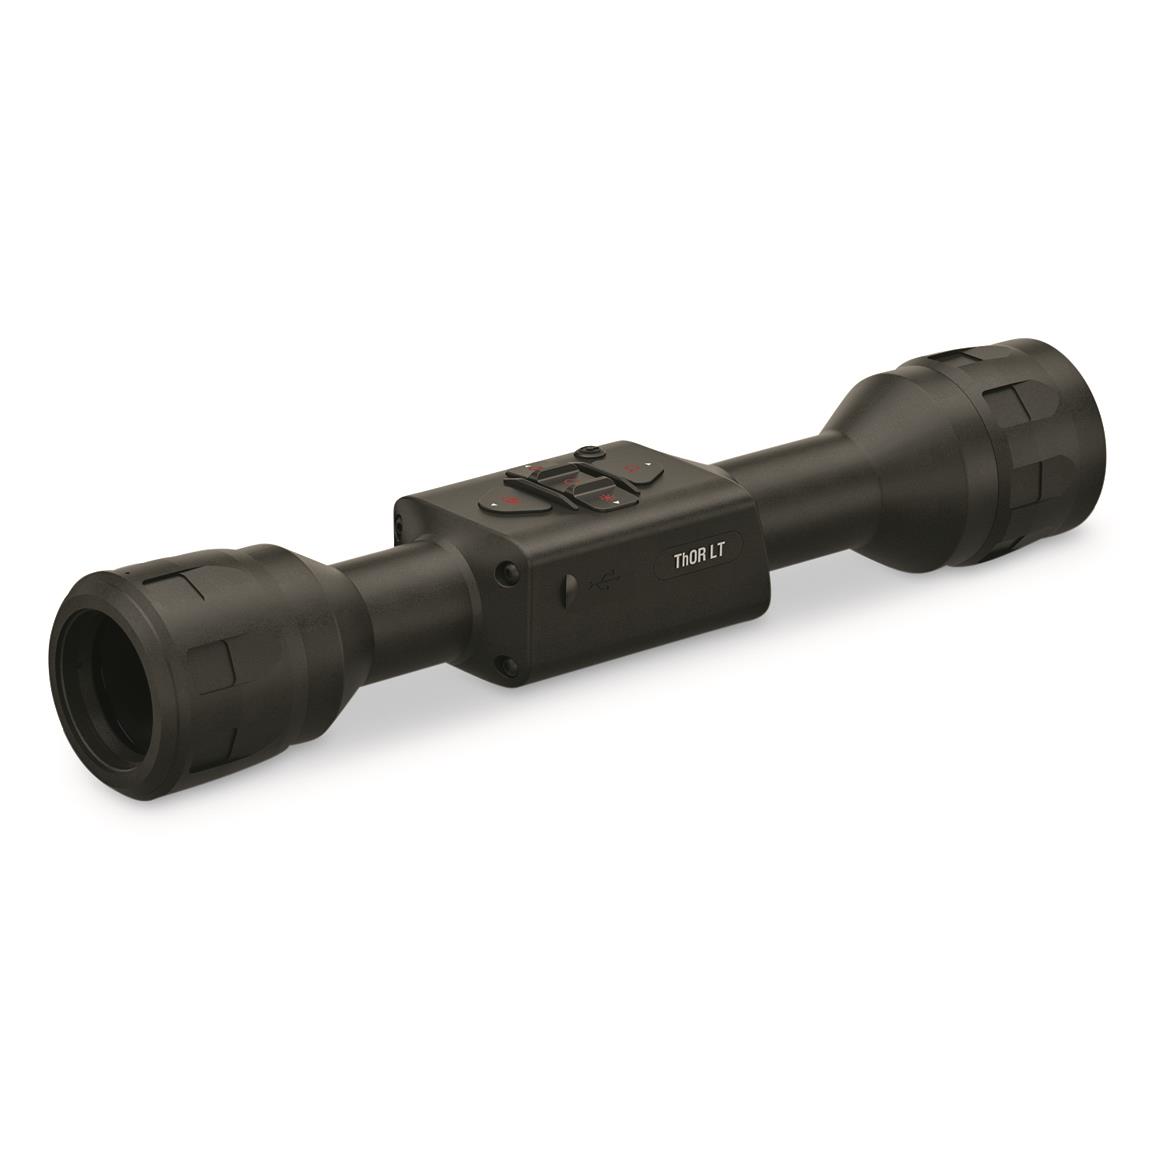 ATN ThOR LTV 320 4-12x Thermal Rifle Scope with Video Recording